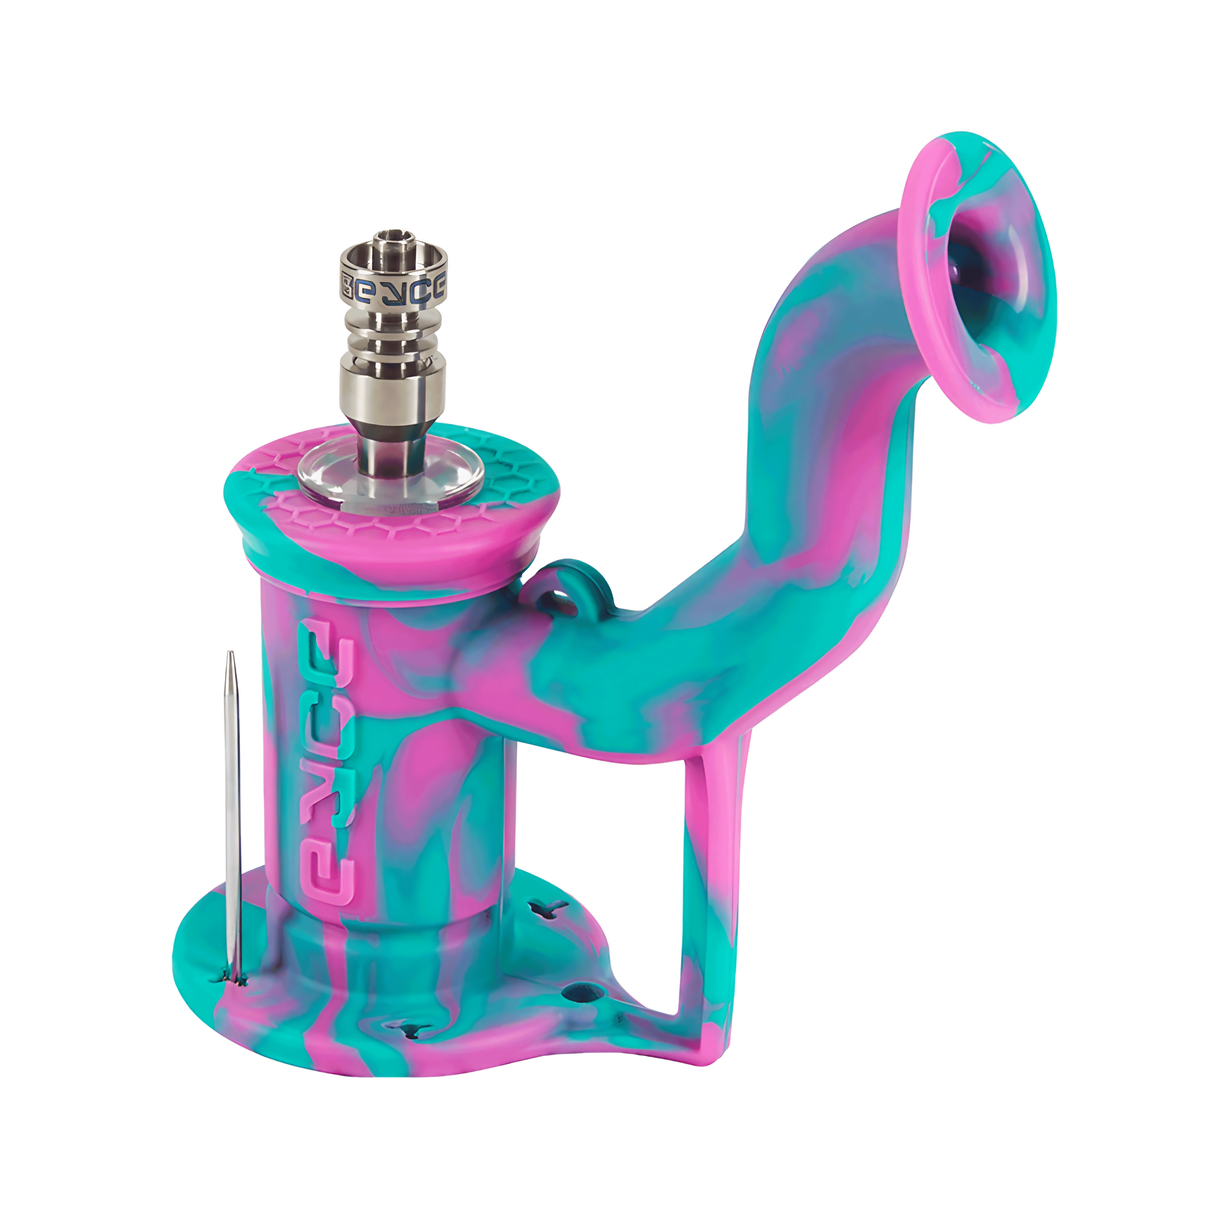 EYCE Rig 2.0 Dab Rig in Coral Reef Pink/Teal with Titanium Nail - Angled Side View